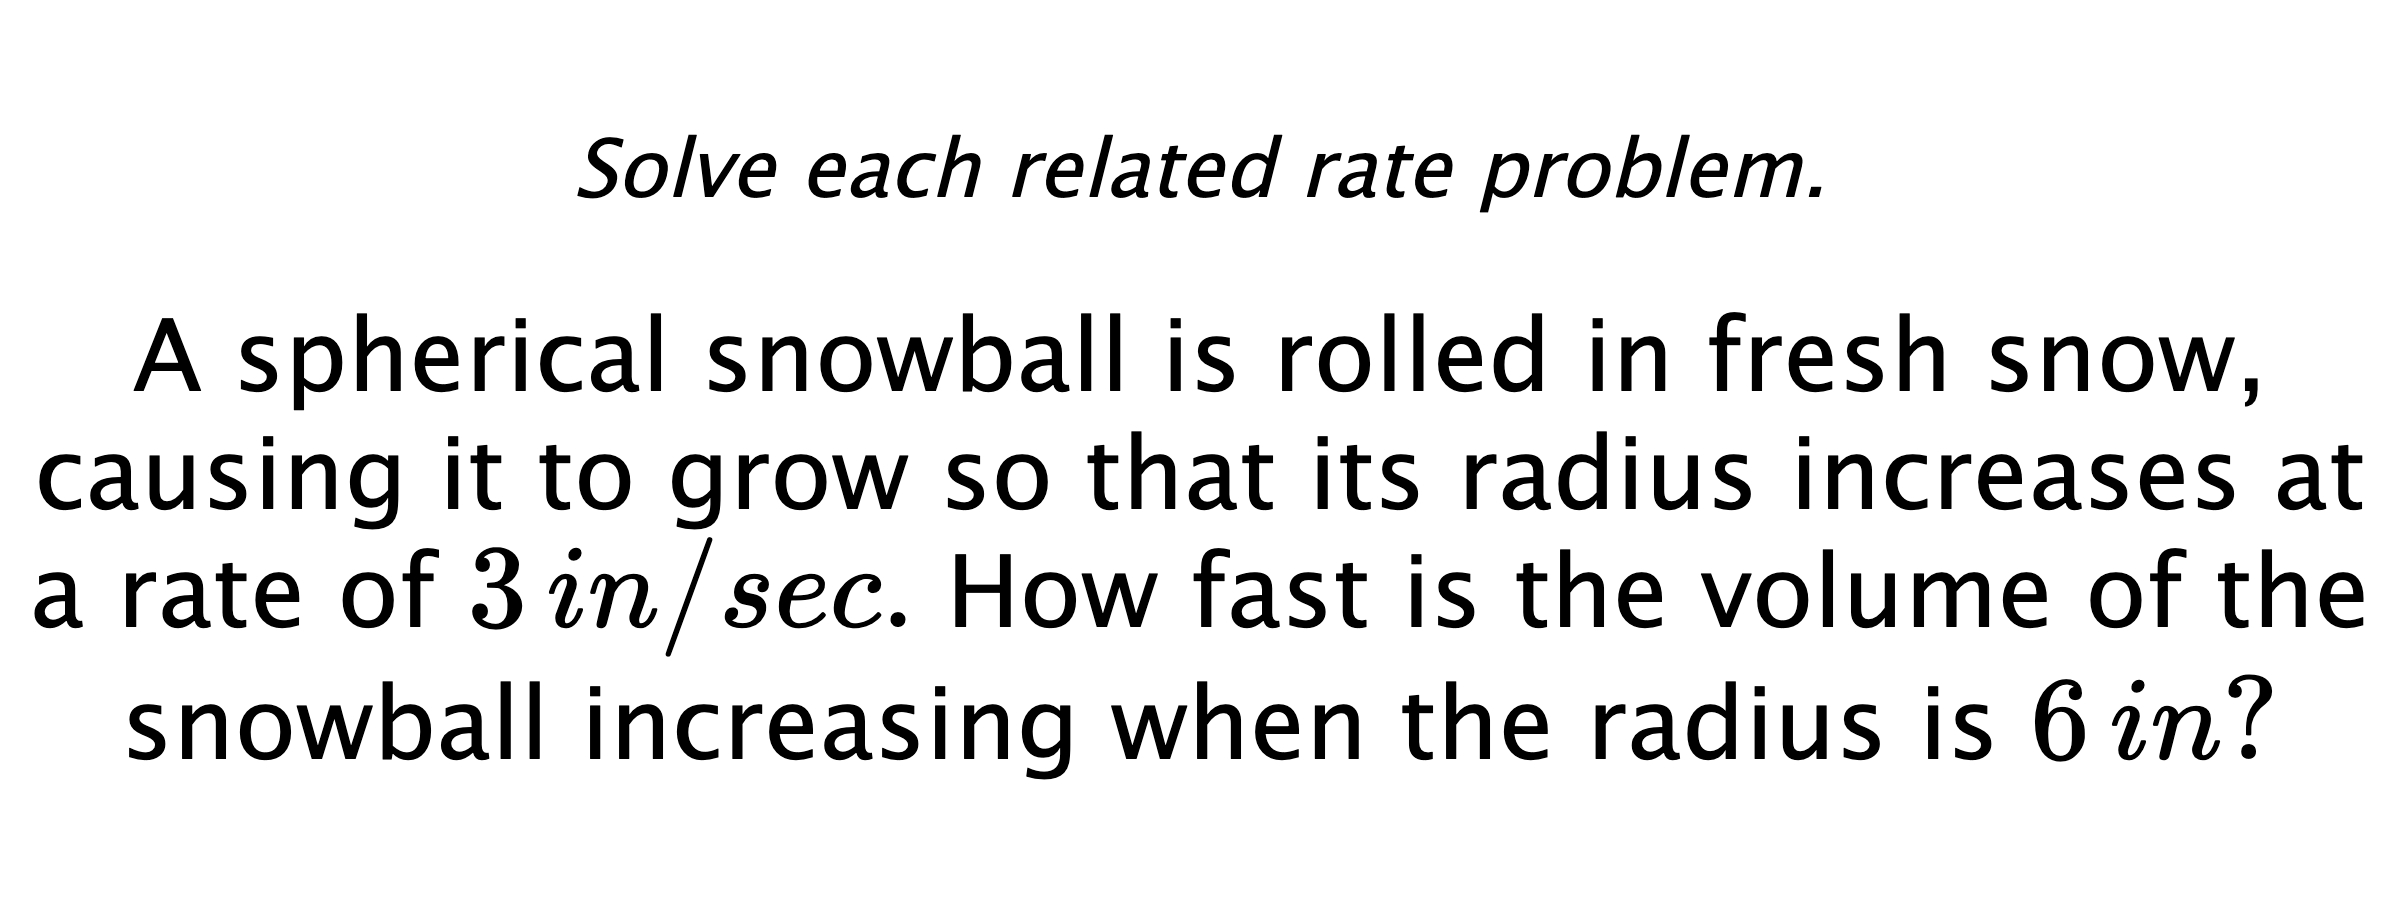 Solve each related rate problem. A spherical snowball is rolled in fresh snow, causing it to grow so that its radius increases at a rate of $3\,in/sec.$ How fast is the volume of the snowball increasing when the radius is $6\,in?$